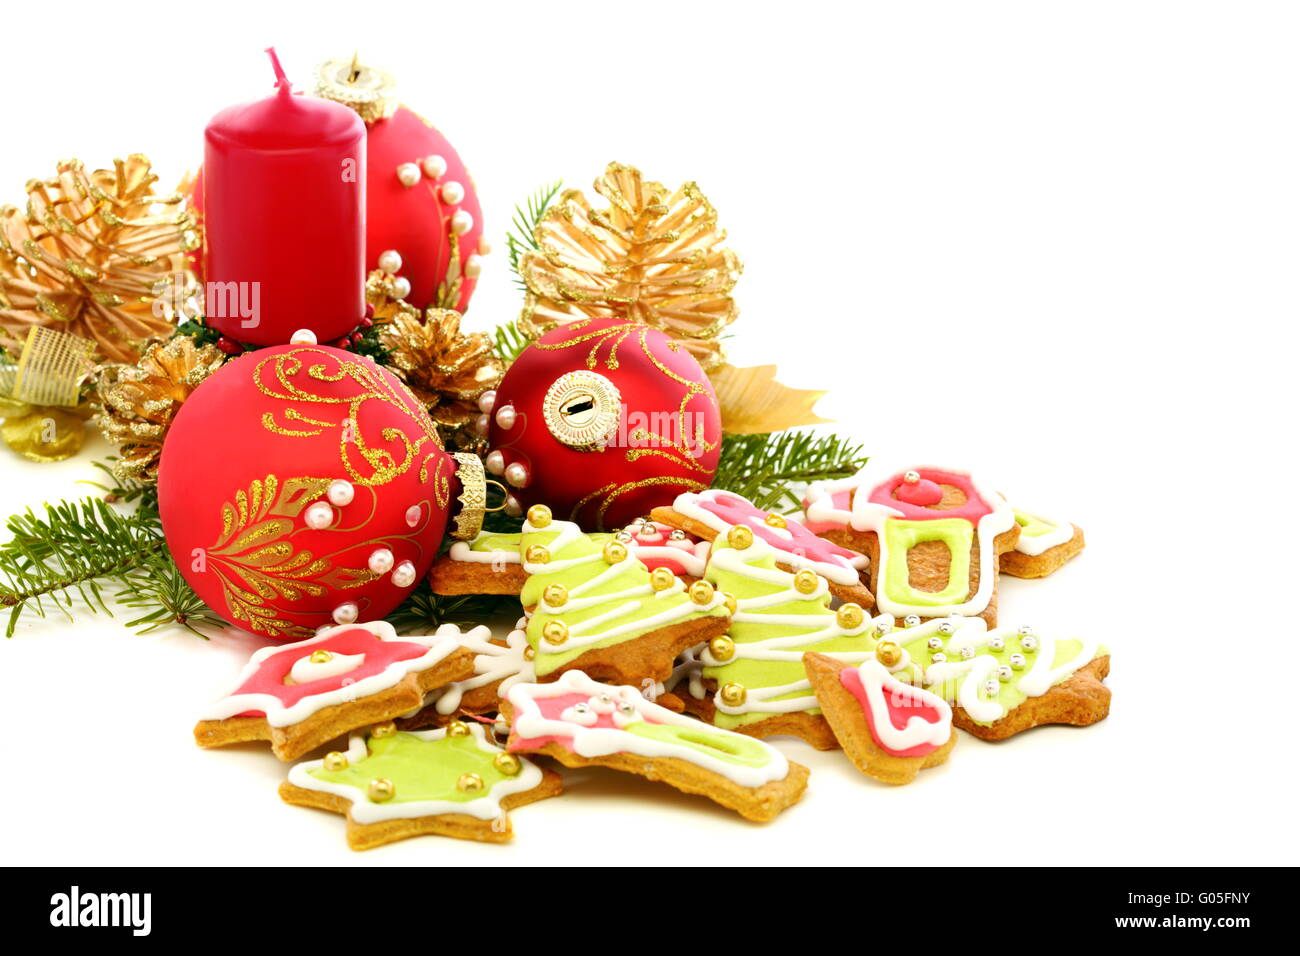 Christmas cookies, red balls and golden cones. Stock Photo